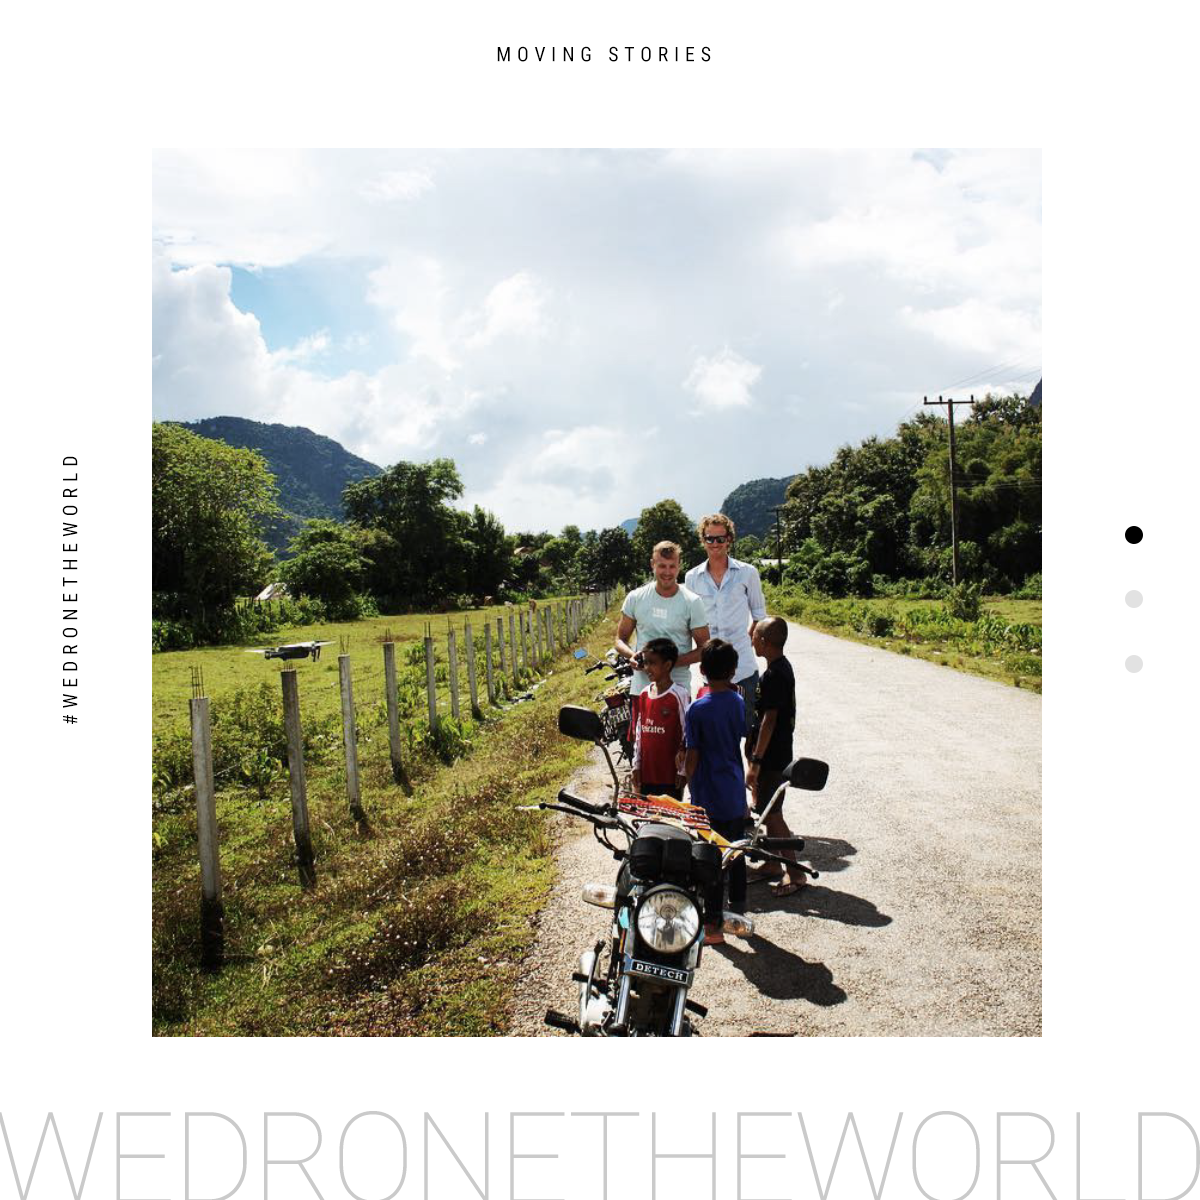 Moving Story - We Drone The World